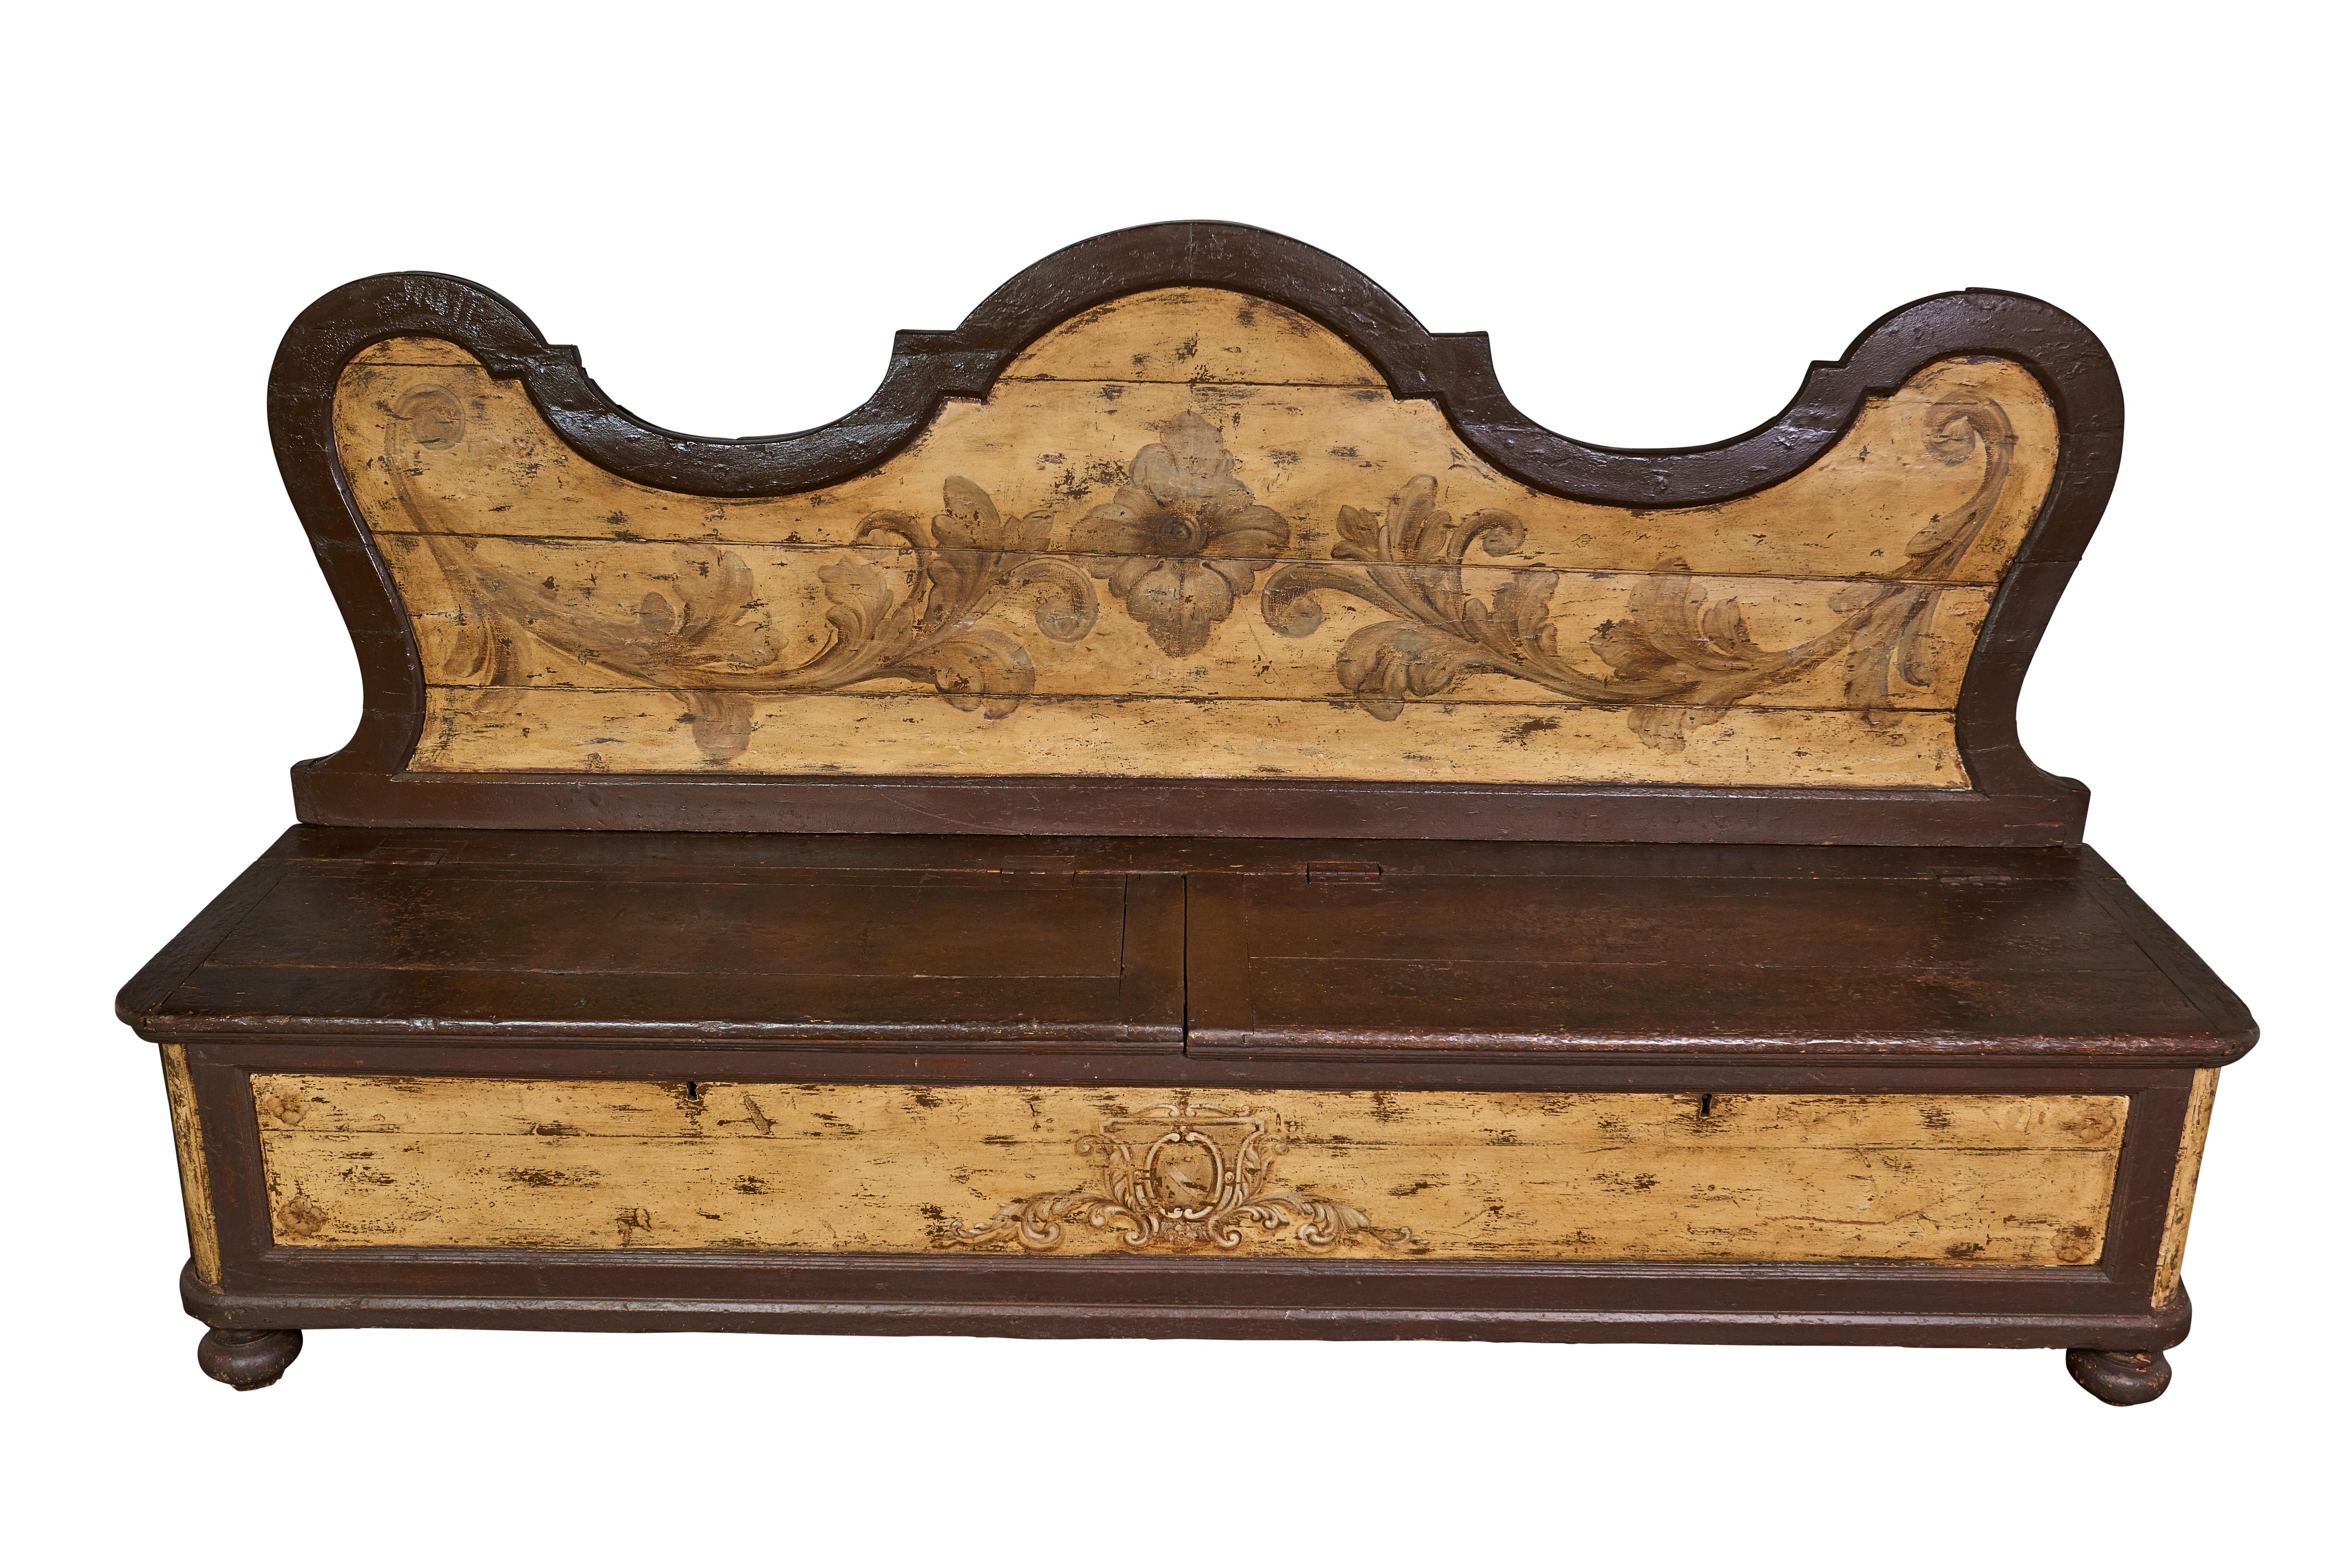 This beautiful hand painted wood bench was made in Italy in the 19th century.

Since Schumacher was founded in 1889, our family-owned company has been synonymous with style, taste, and innovation. A passion for luxury and an unwavering commitment